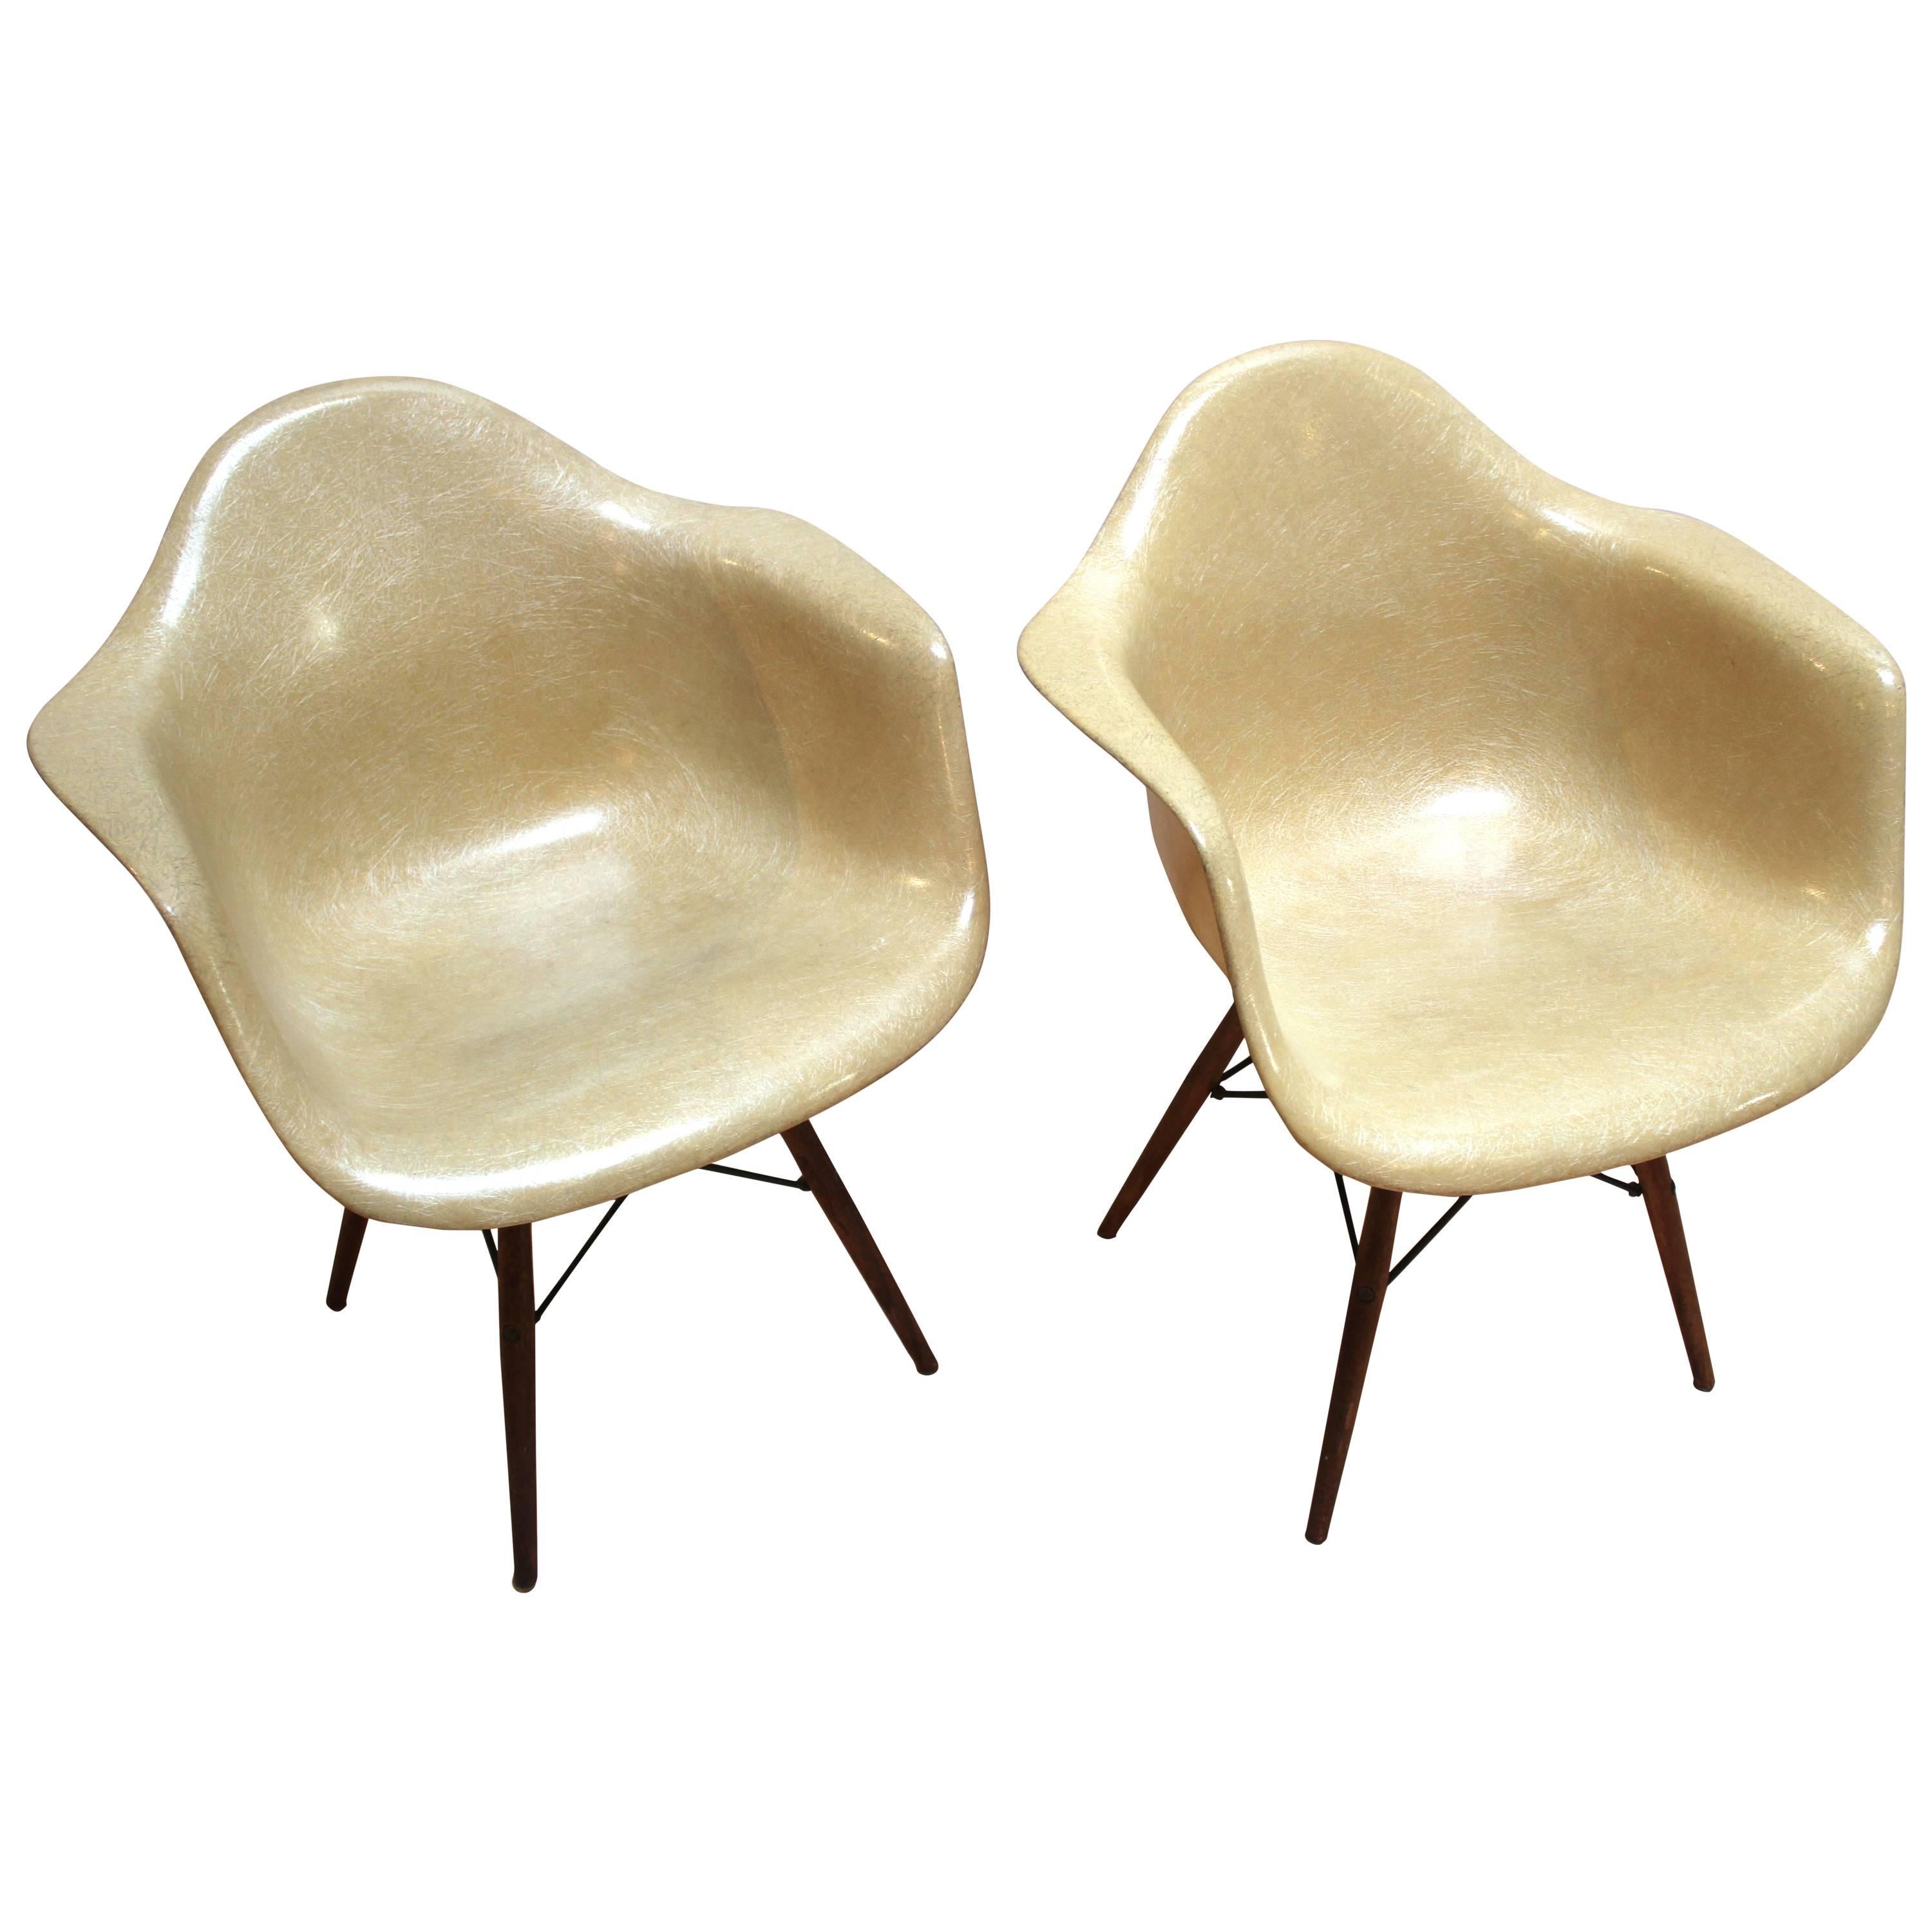 Pair of 1950s fiberglass DAW lounge chairs by Charles and Ray Eames, manufactured by Zenith Plastics for Herman Miller. The dowels in the bases are walnut. Price is for the pair.